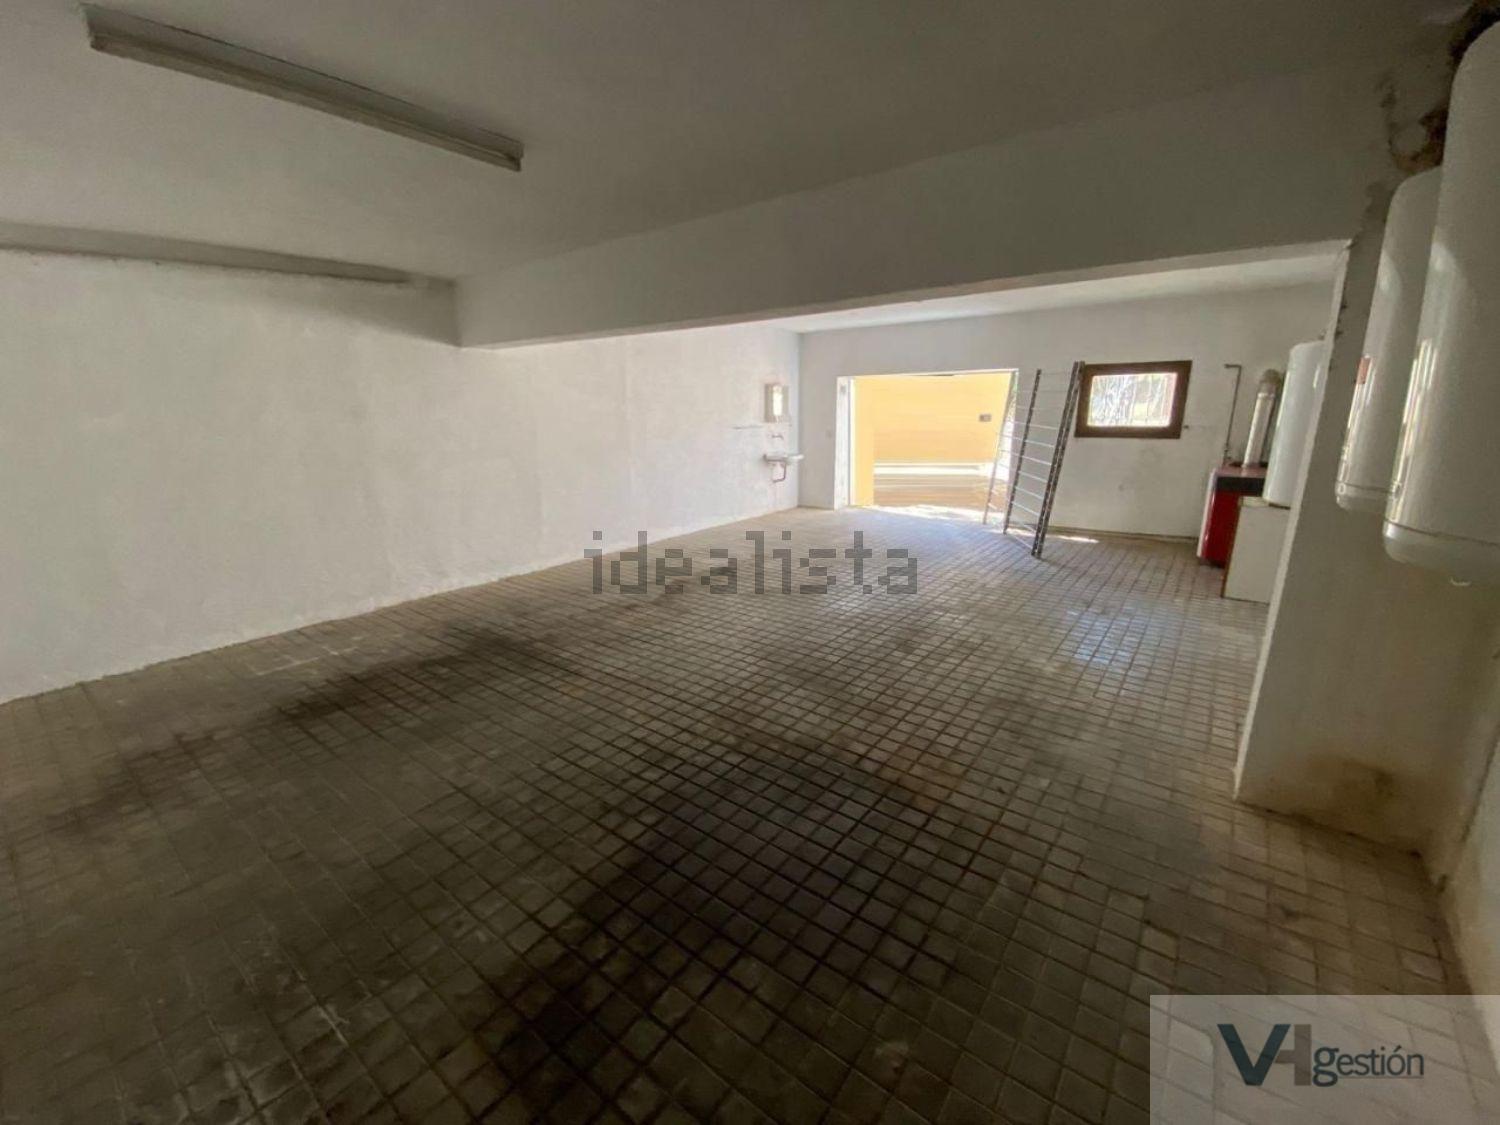 For sale of house in Torrelodones